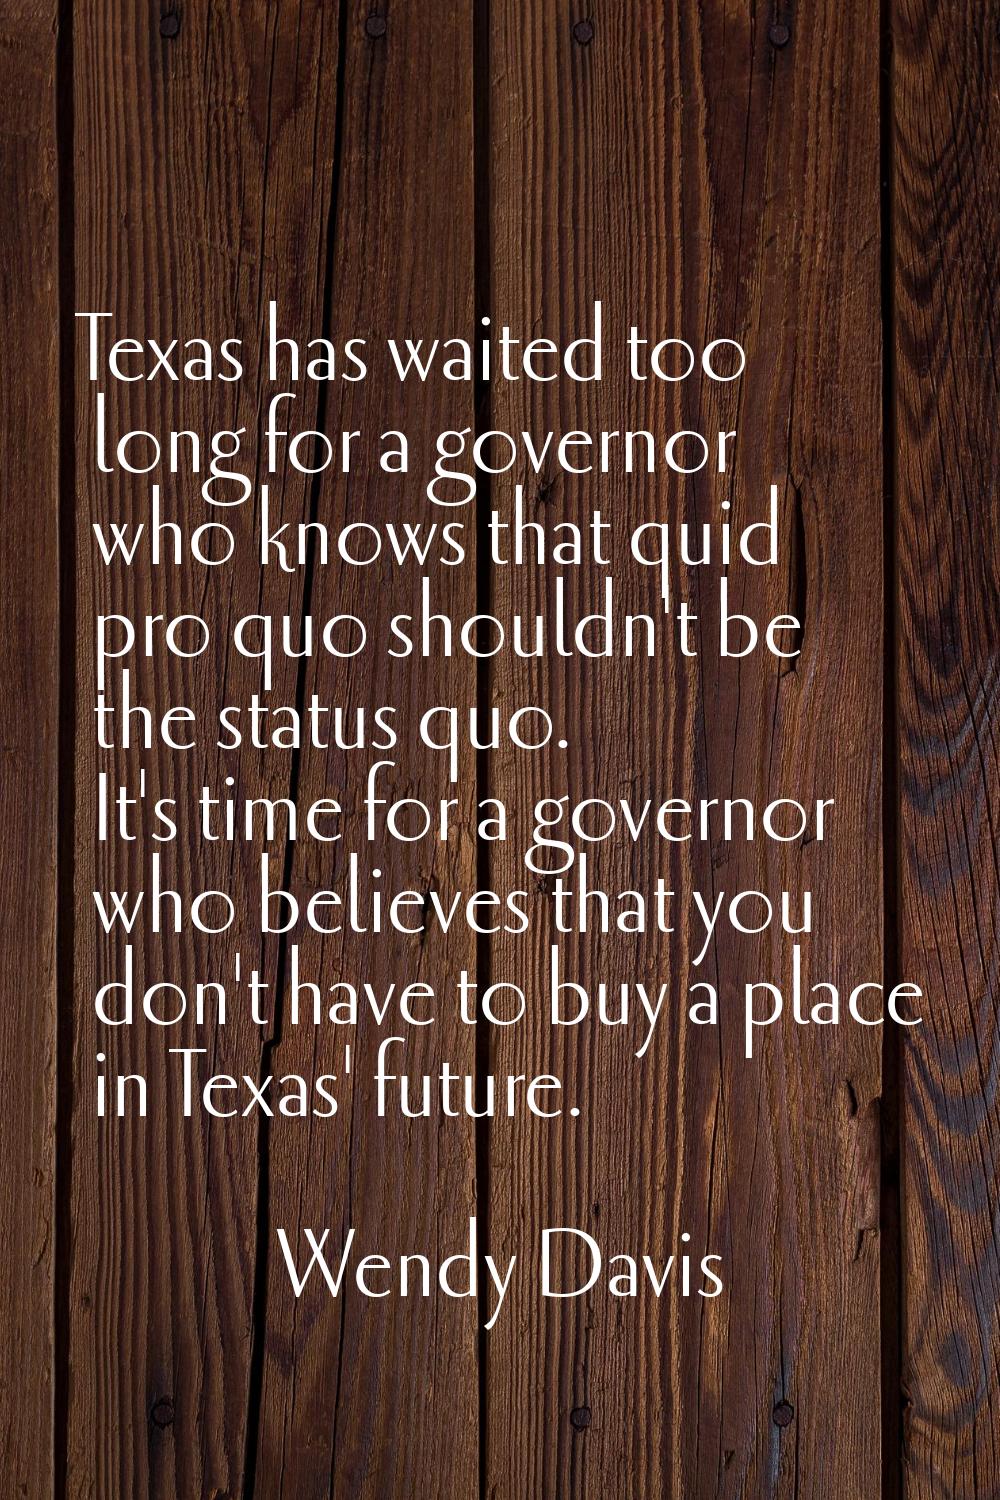 Texas has waited too long for a governor who knows that quid pro quo shouldn't be the status quo. I